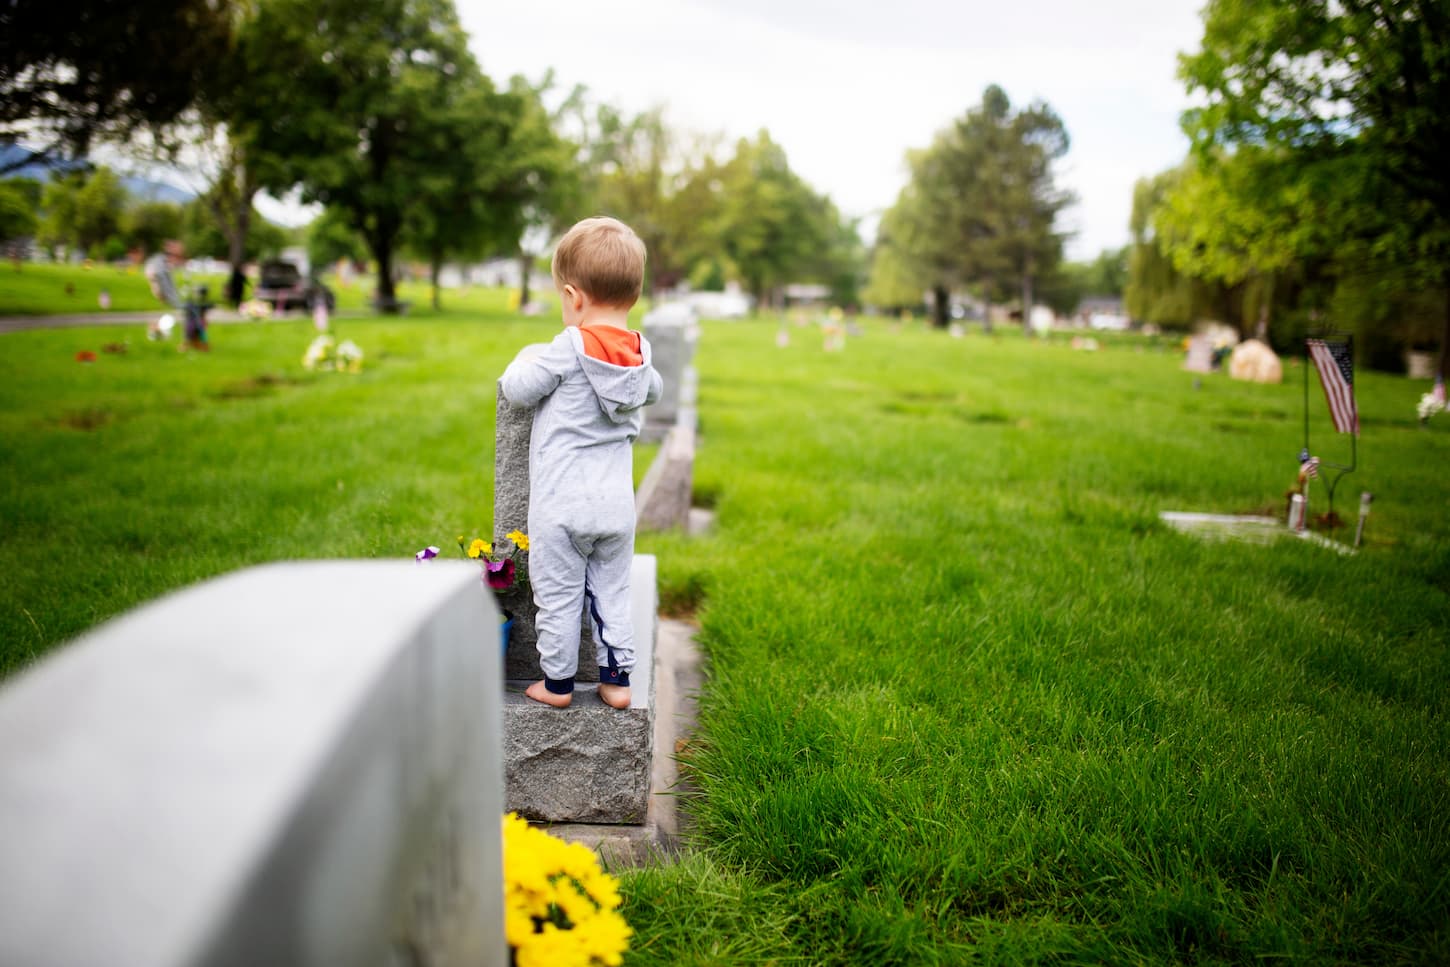 How To Find Out Where an Ancestor is Buried: Complete Guide